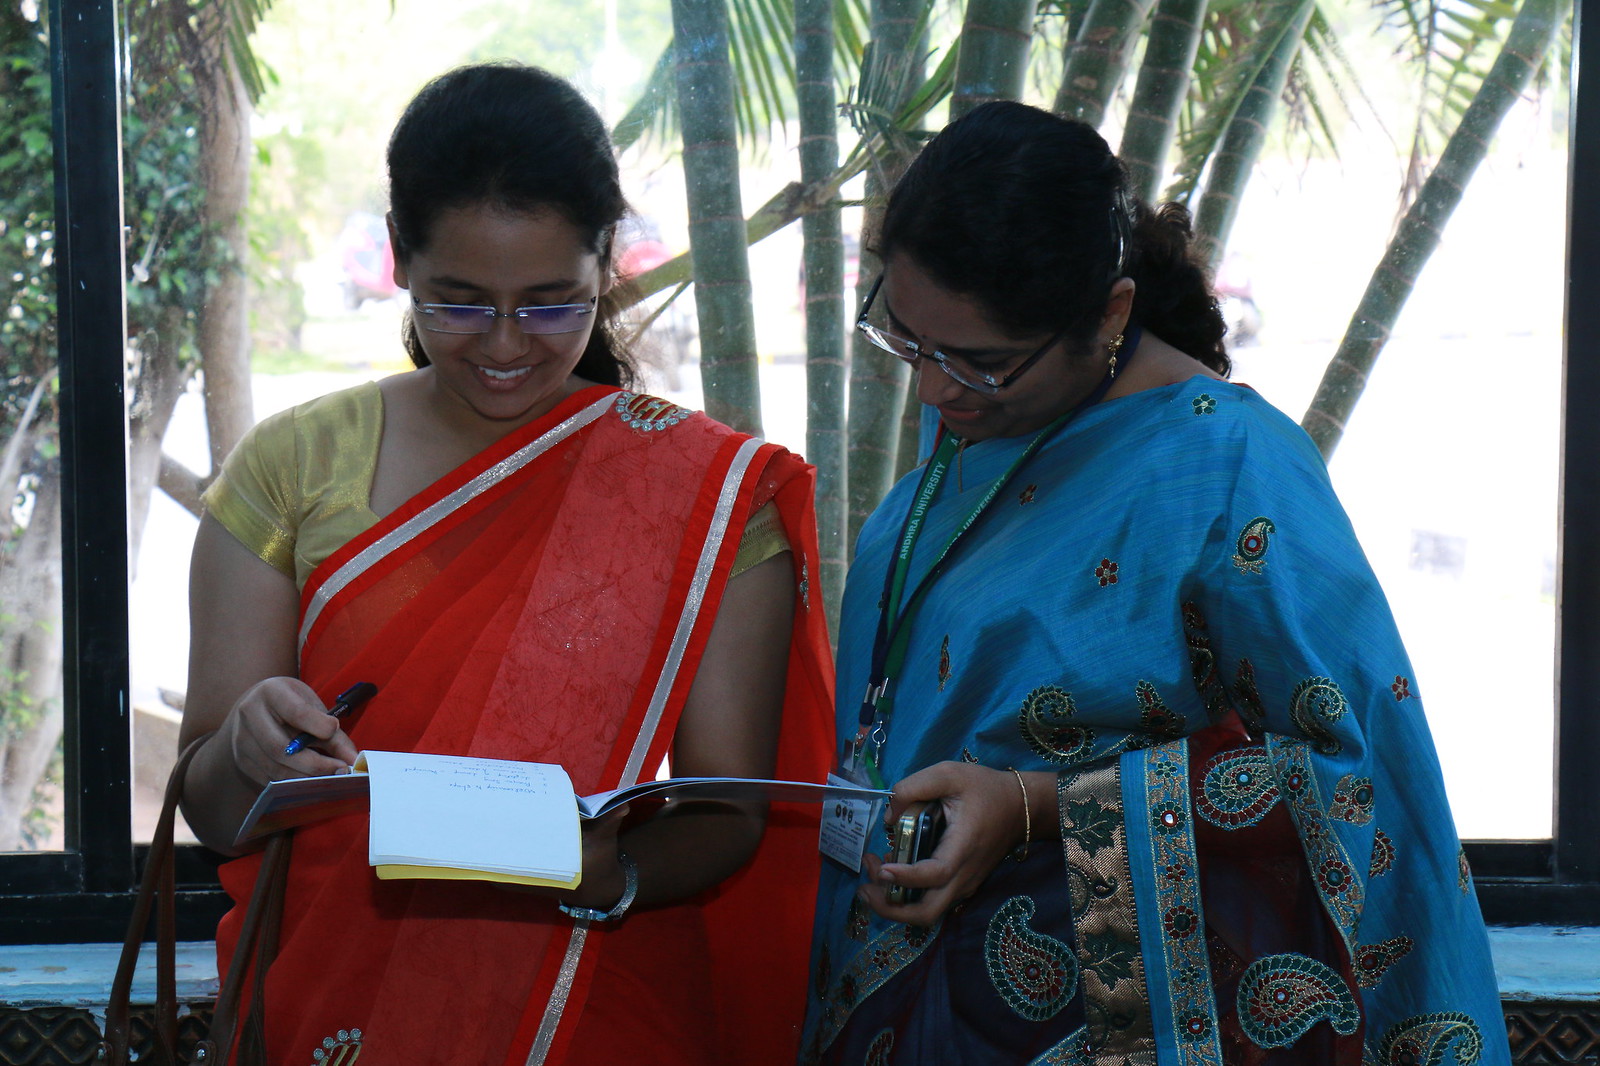 Angela Elizabeth Peter, Research Scholar and Dr. P. Bindiya, College of Science and Technology, Andhra University, Visakhapatnam, Andhra Pradesh